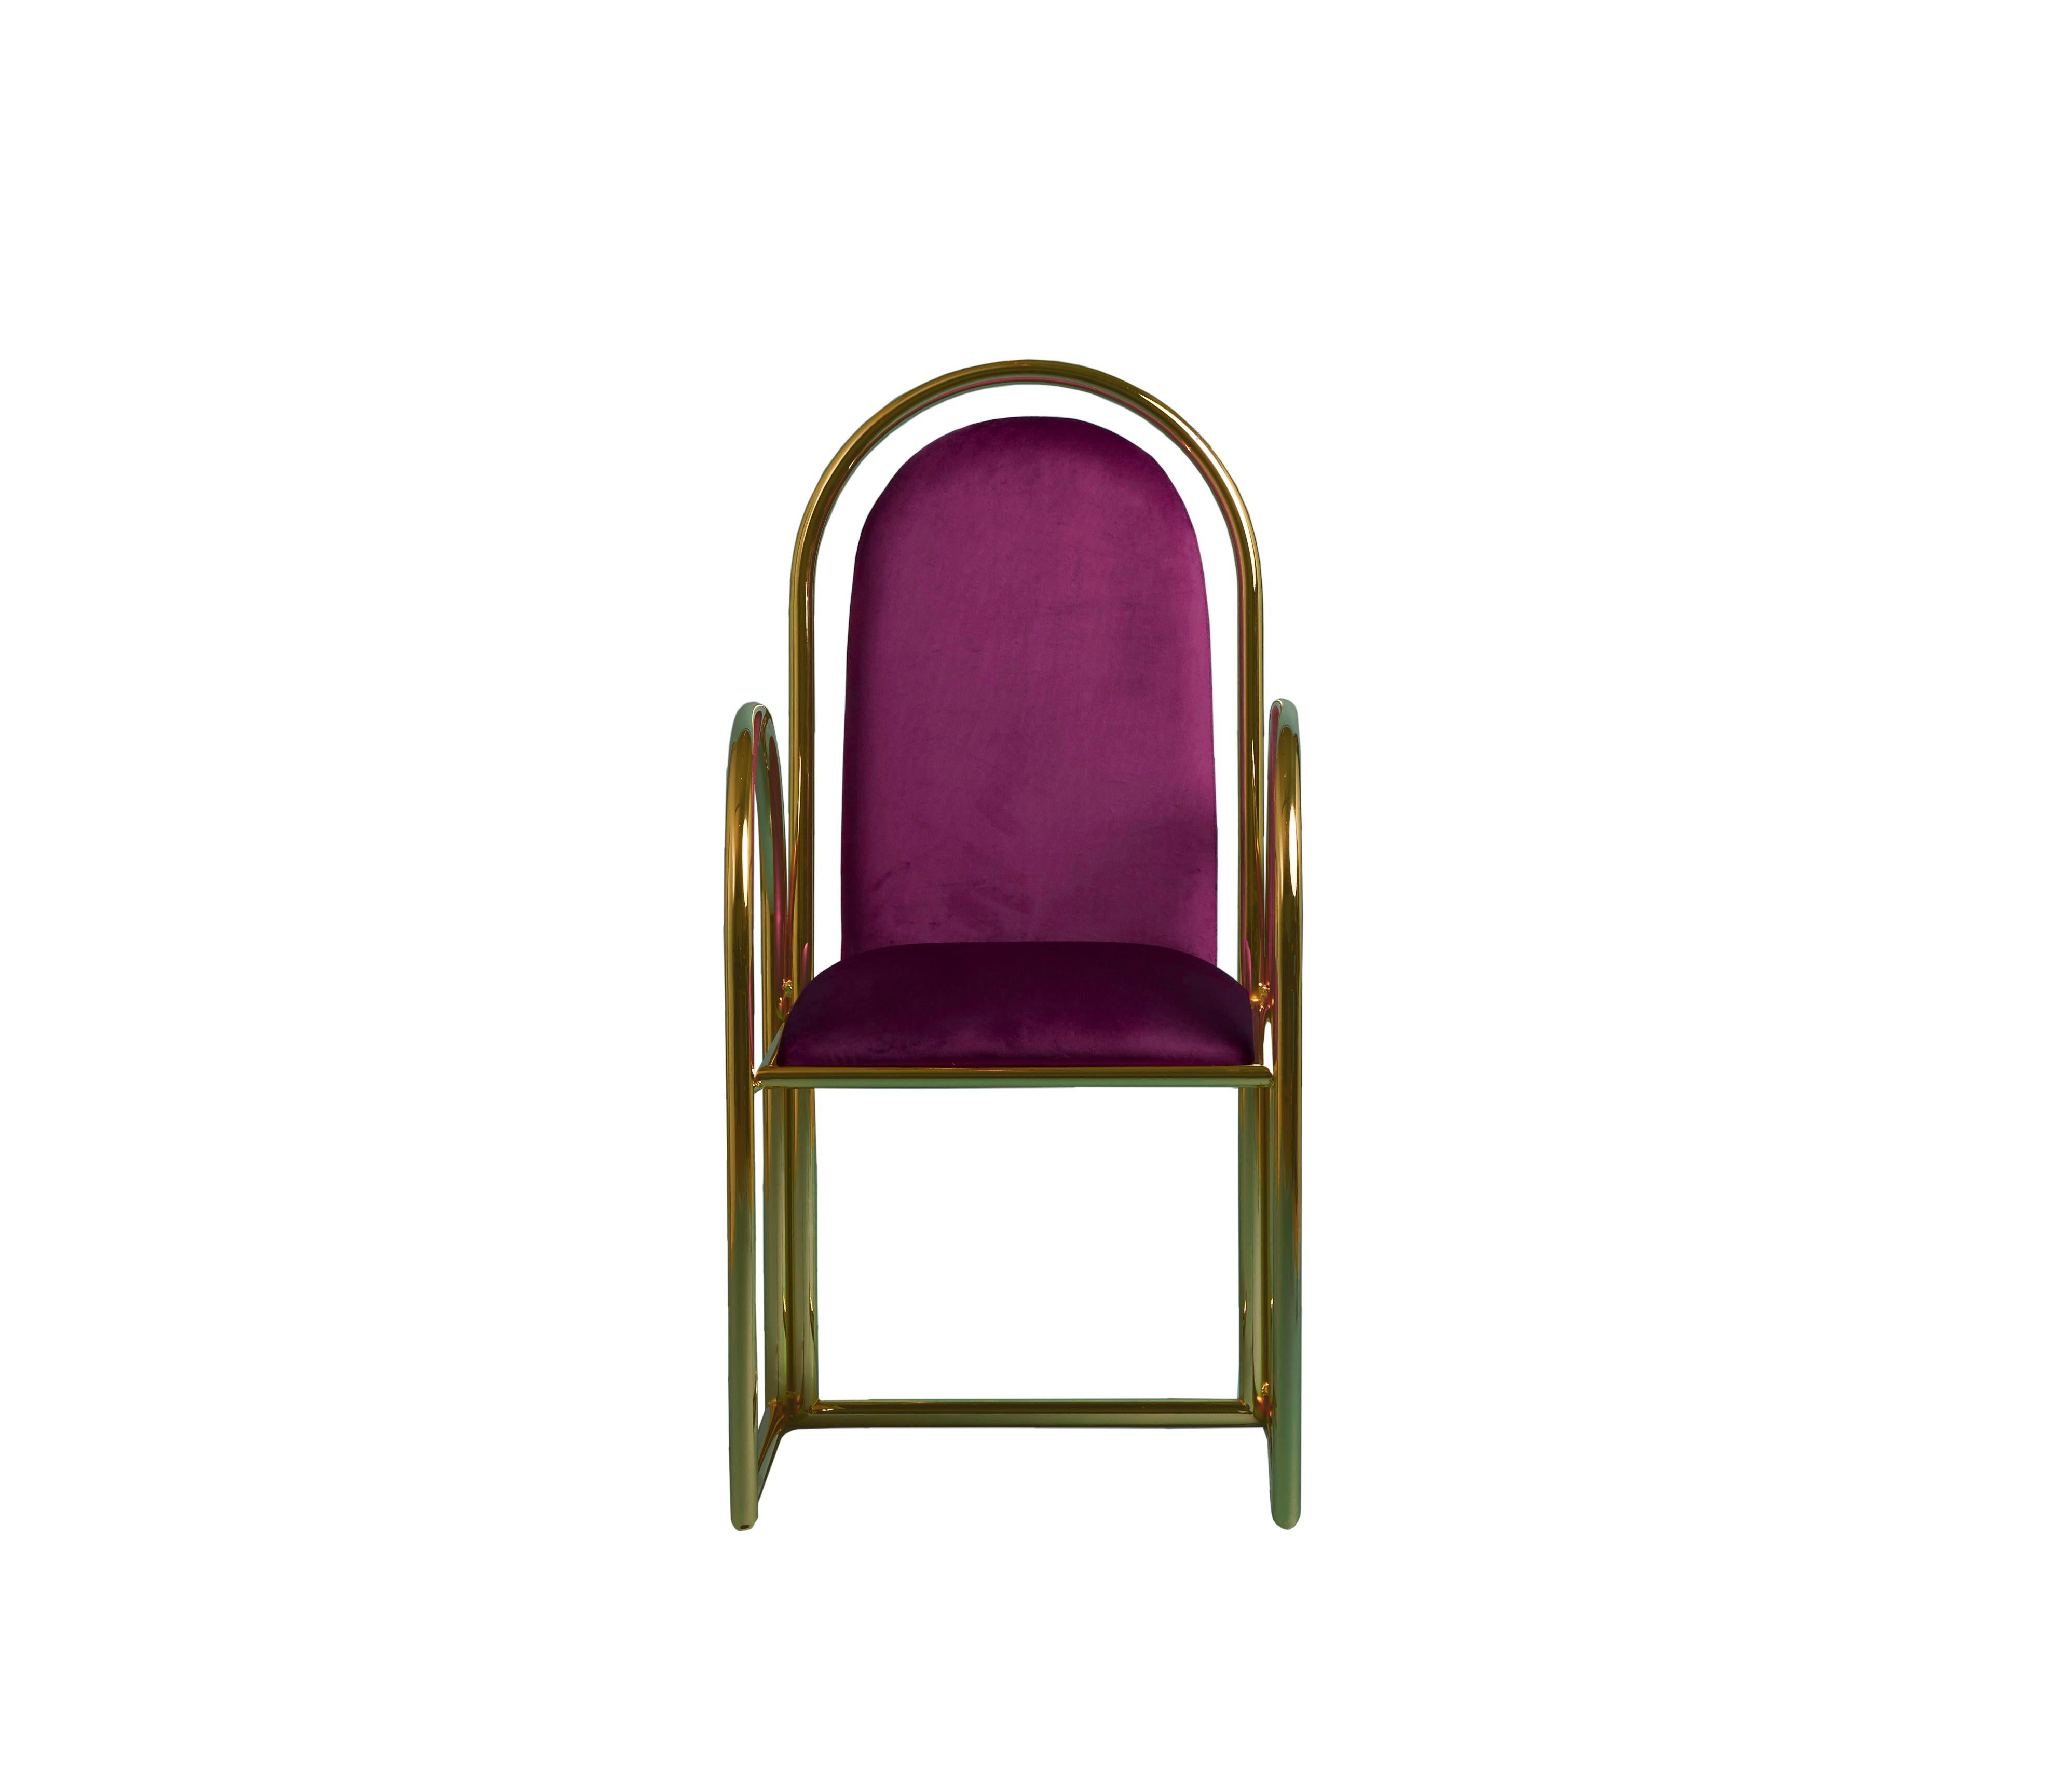 Velvet Set of 4 Arco Chairs by Houtique